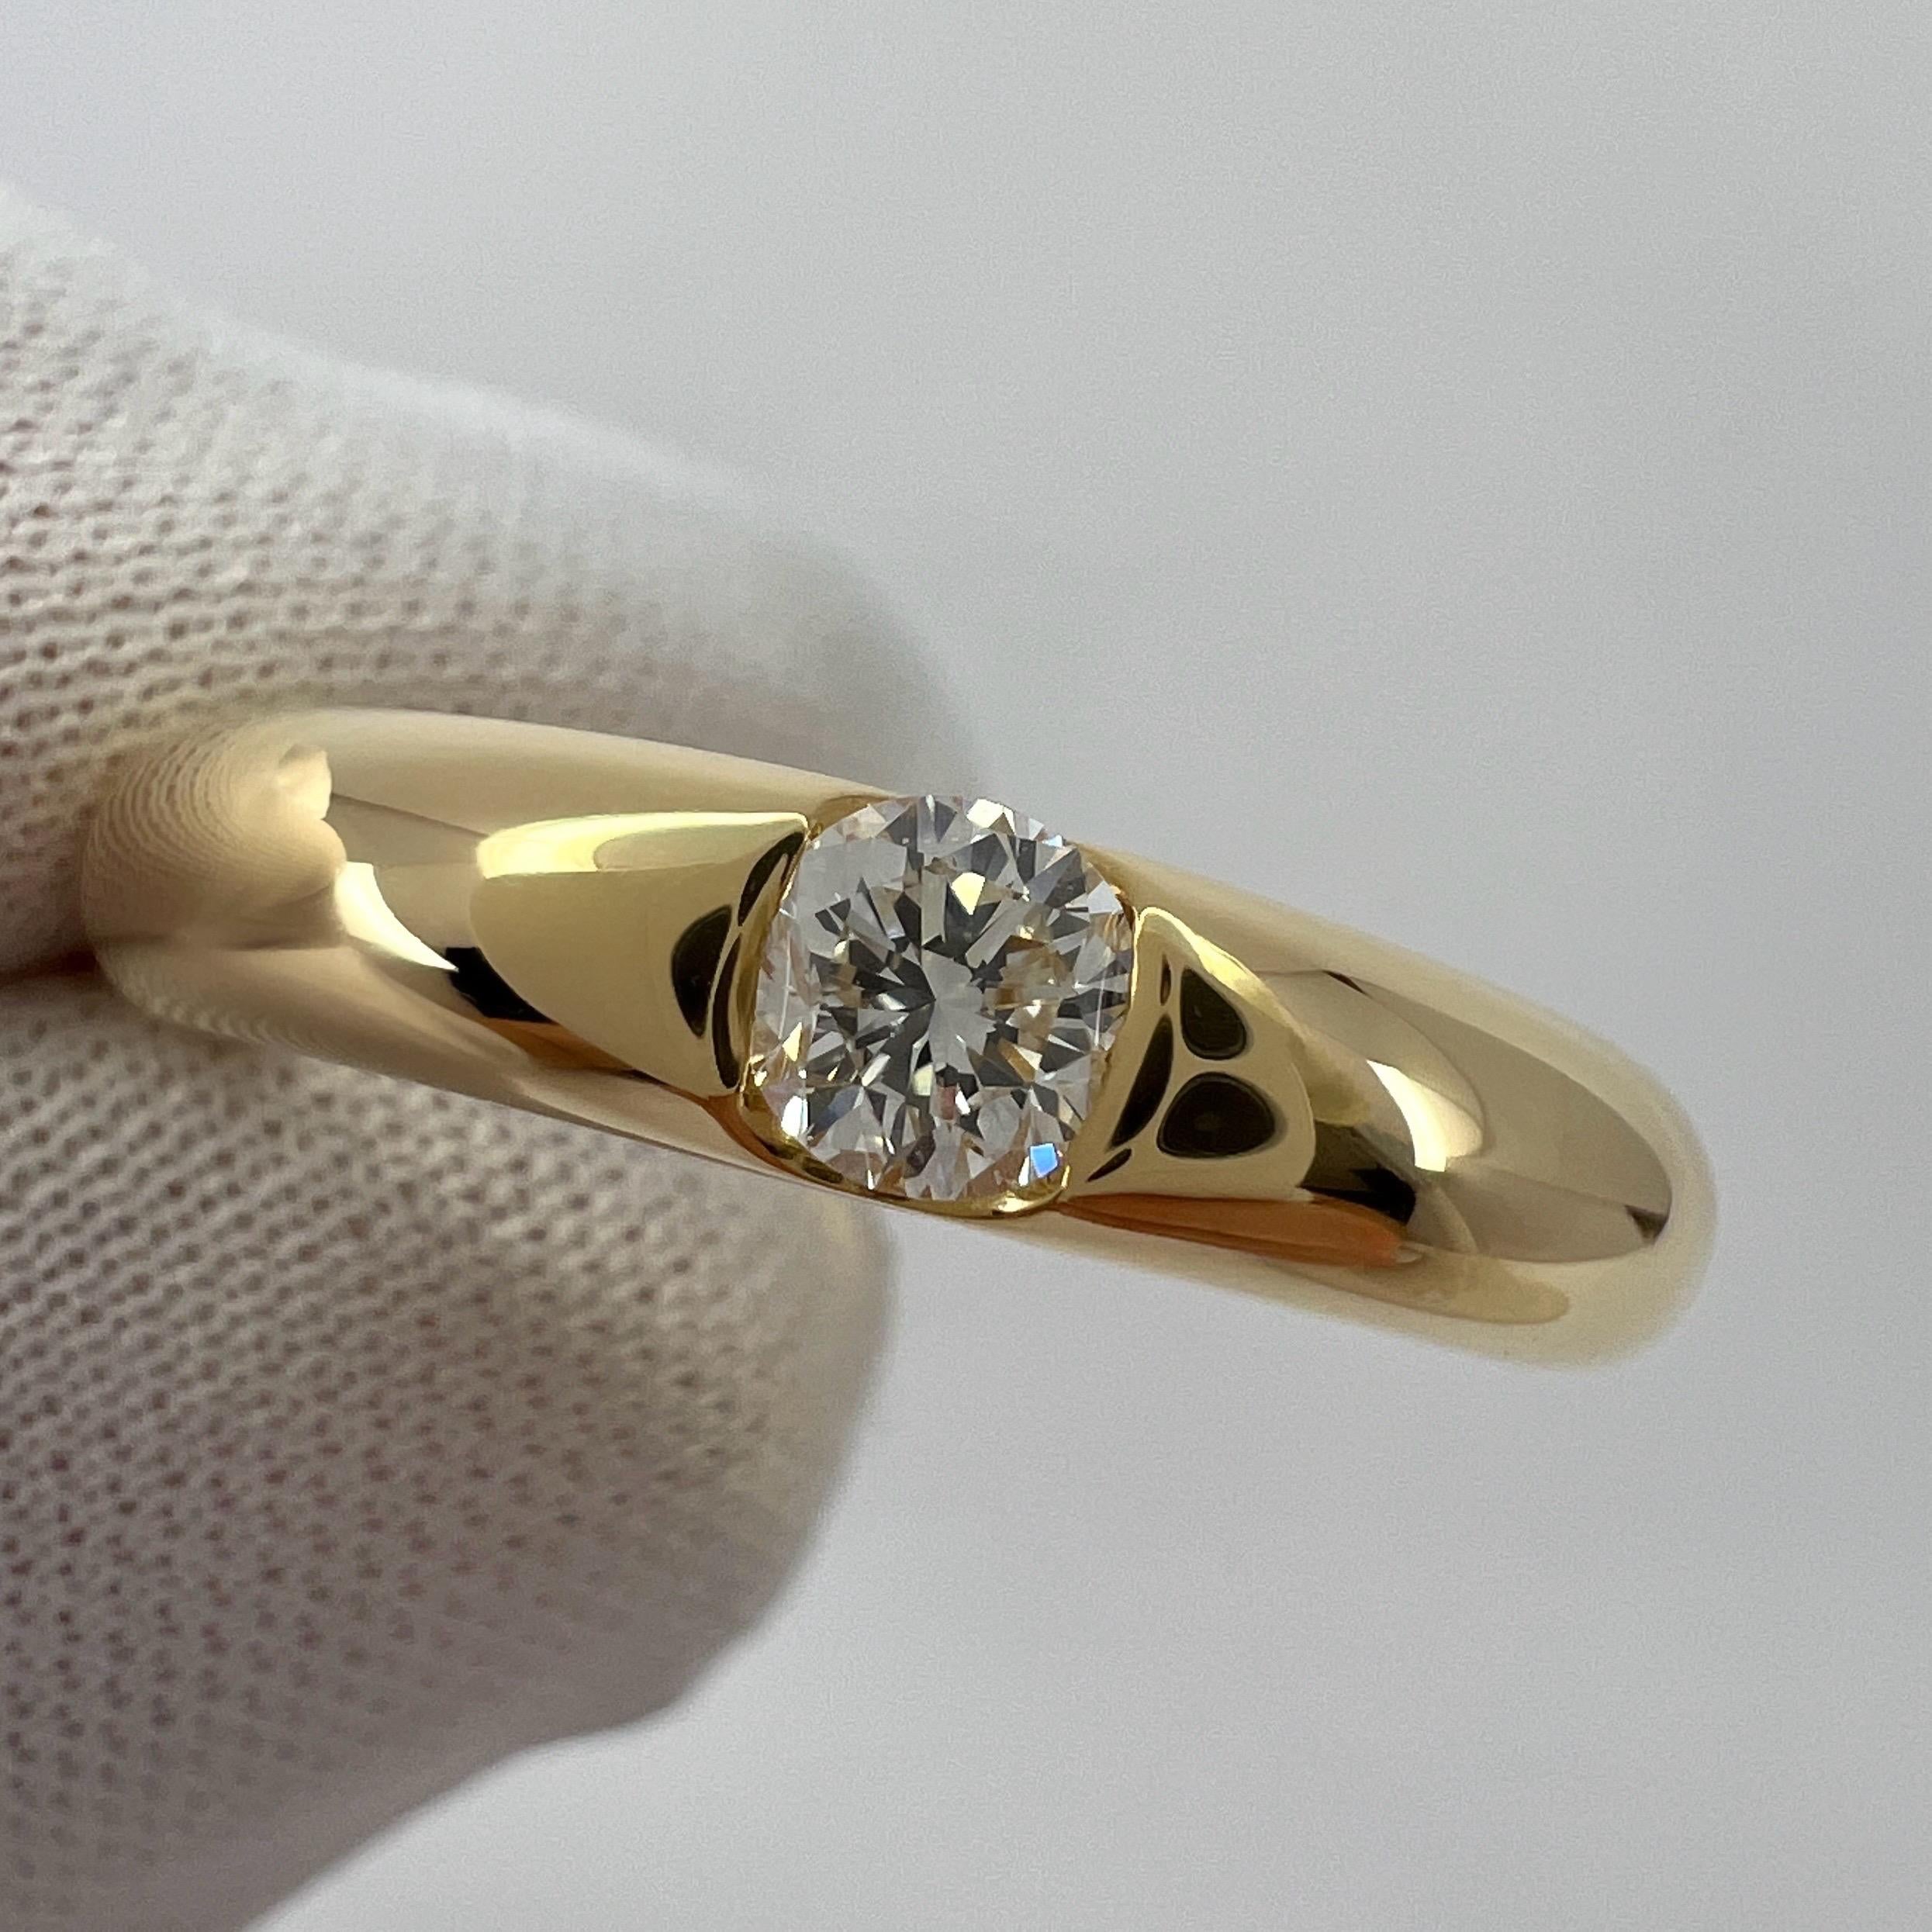 Vintage Cartier Round Diamond Ellipse 18k Yellow Gold Solitaire Band Ring US5 49 For Sale 4